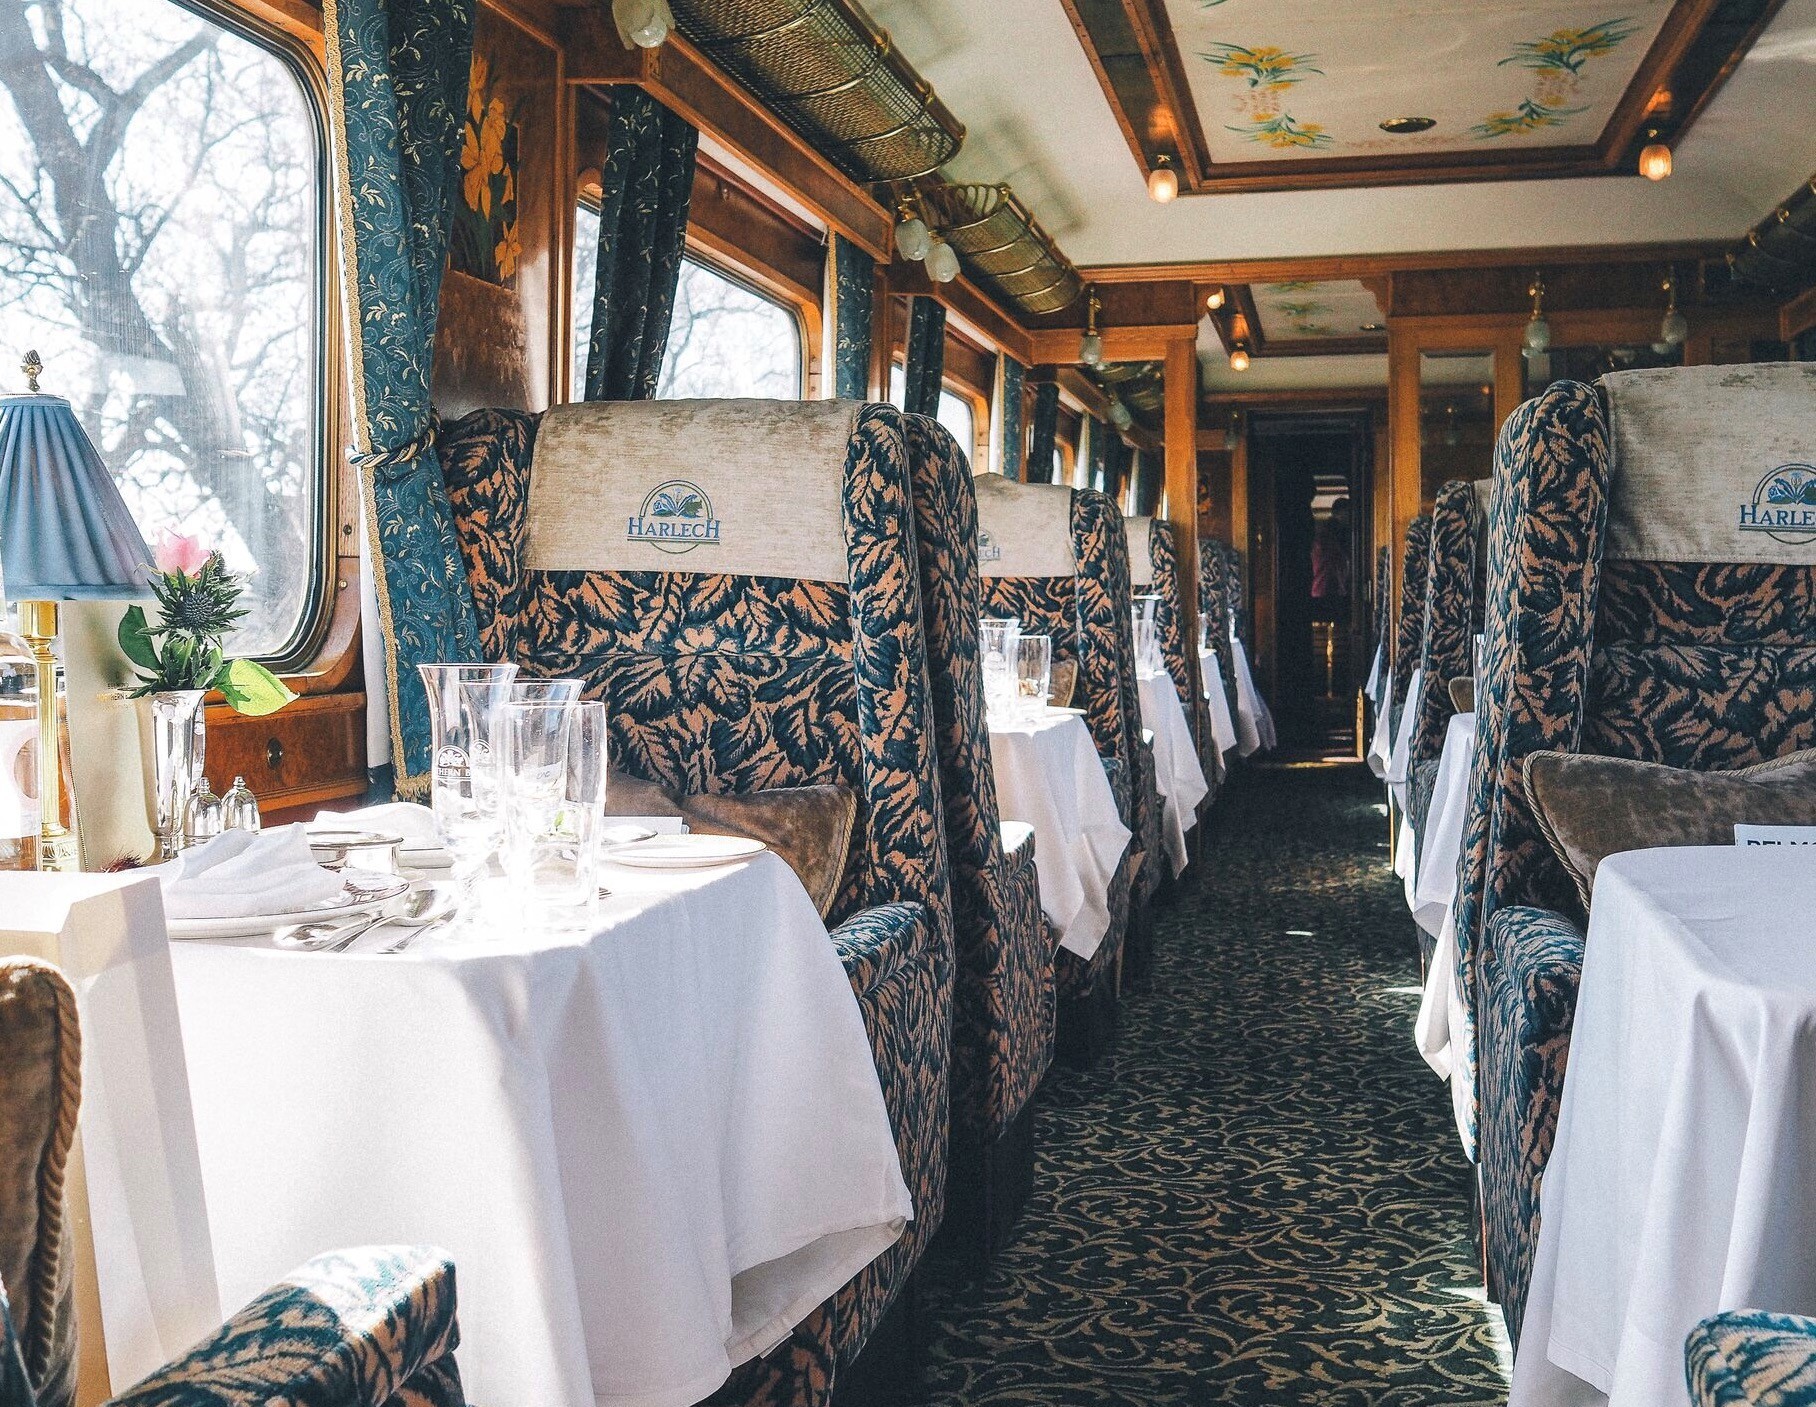 The luxurious Northern Belle